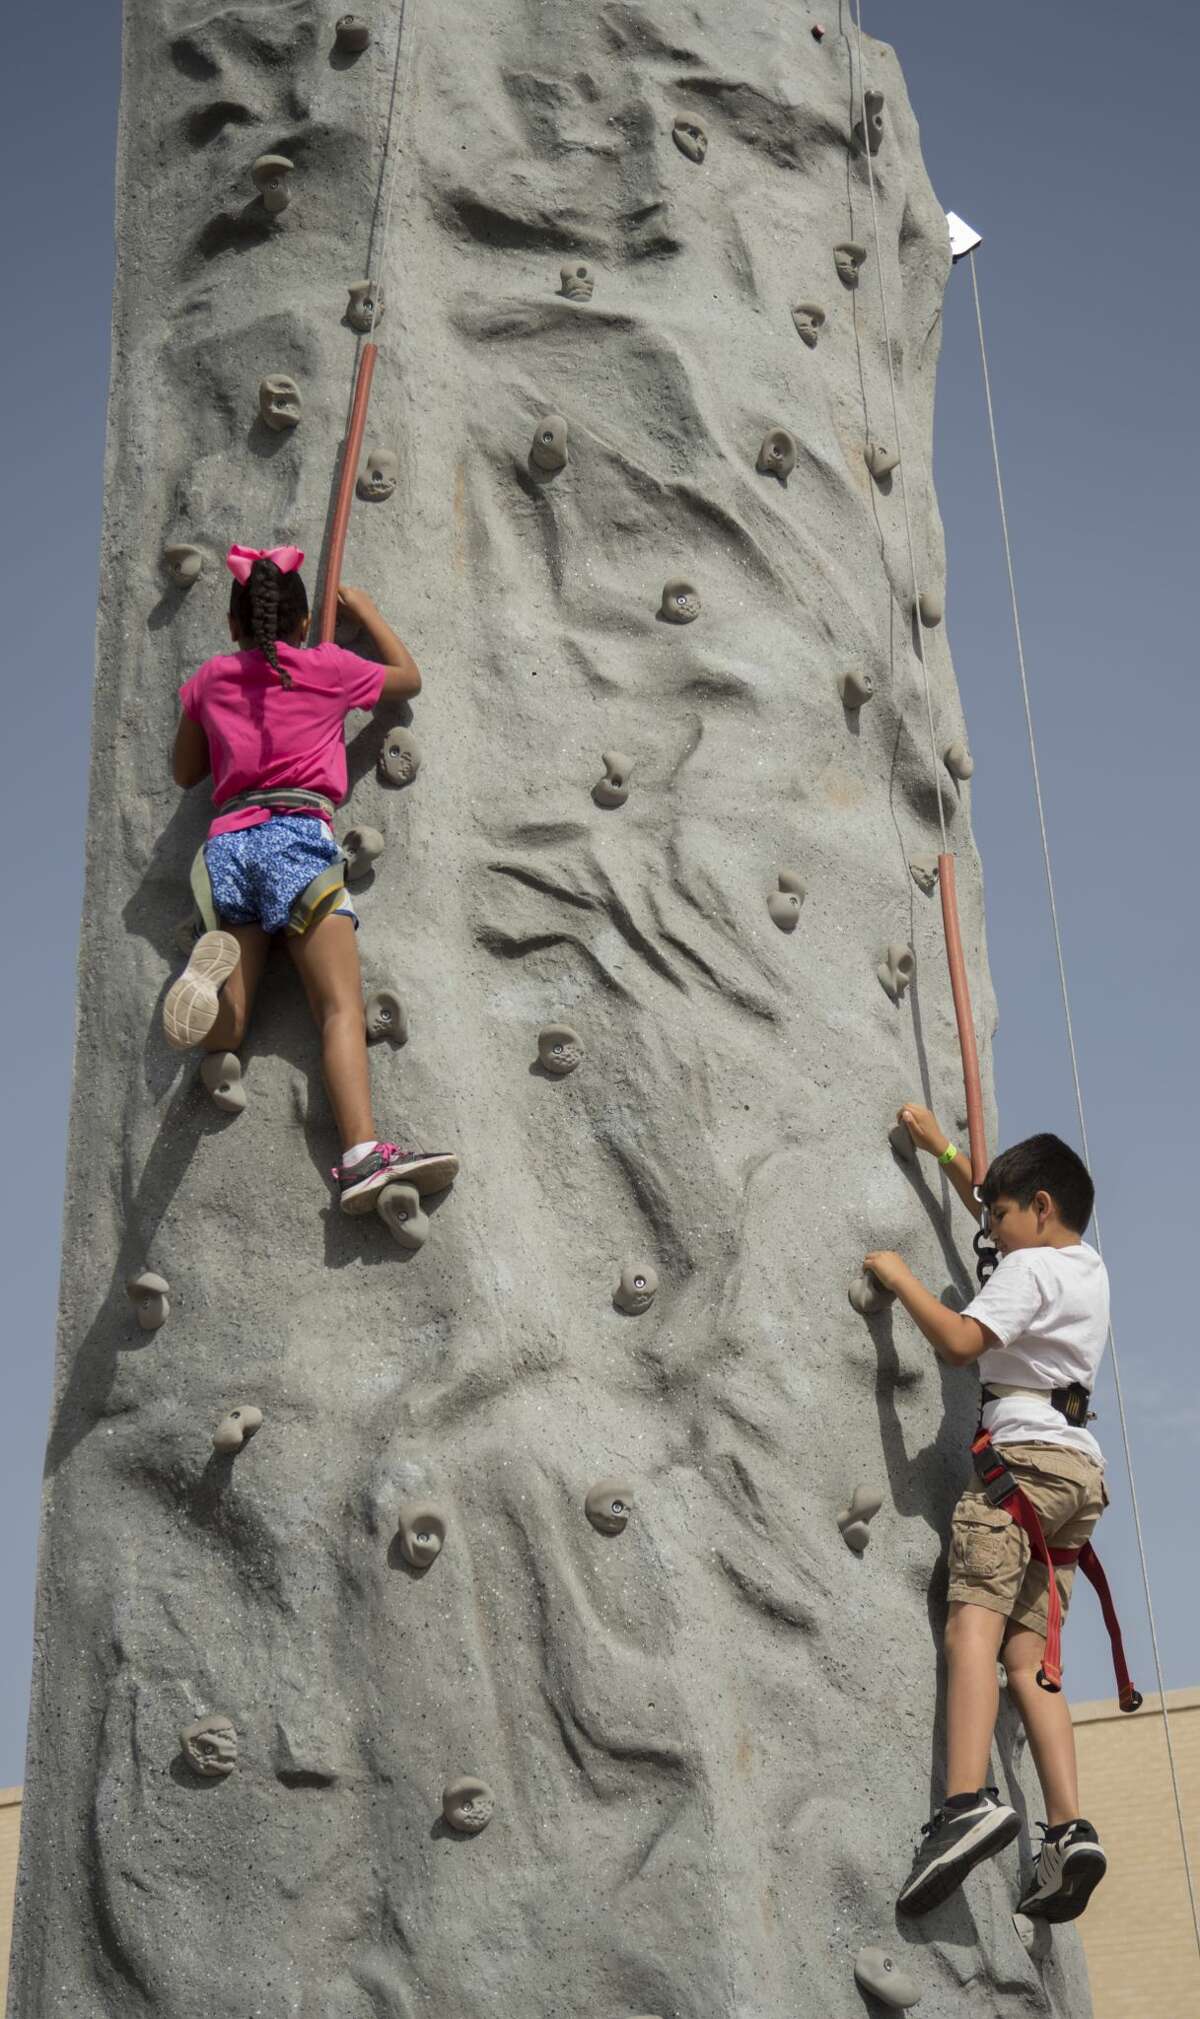 Participants try their luck on a climbing wall 04-01-17 at the Midland YMCA Egg-Stravaganza. Tim Fischer/Reporter-Telegram